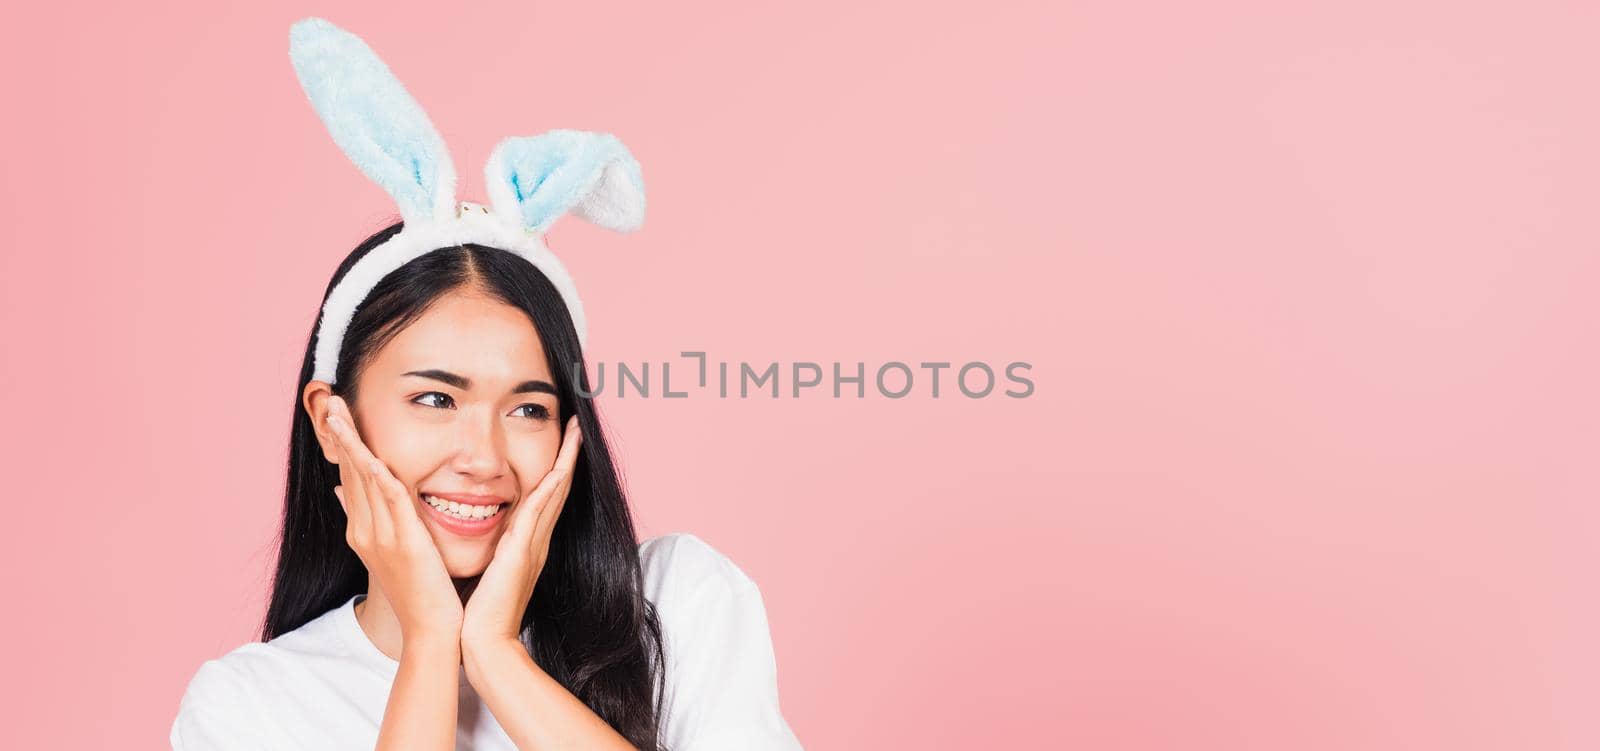 Happy Easter Day. Beautiful young woman teen smiling wearing Easter rabbit bunny ears holding her cheeks excited surprised, Portrait female face touch massage, studio shot isolated on pink background